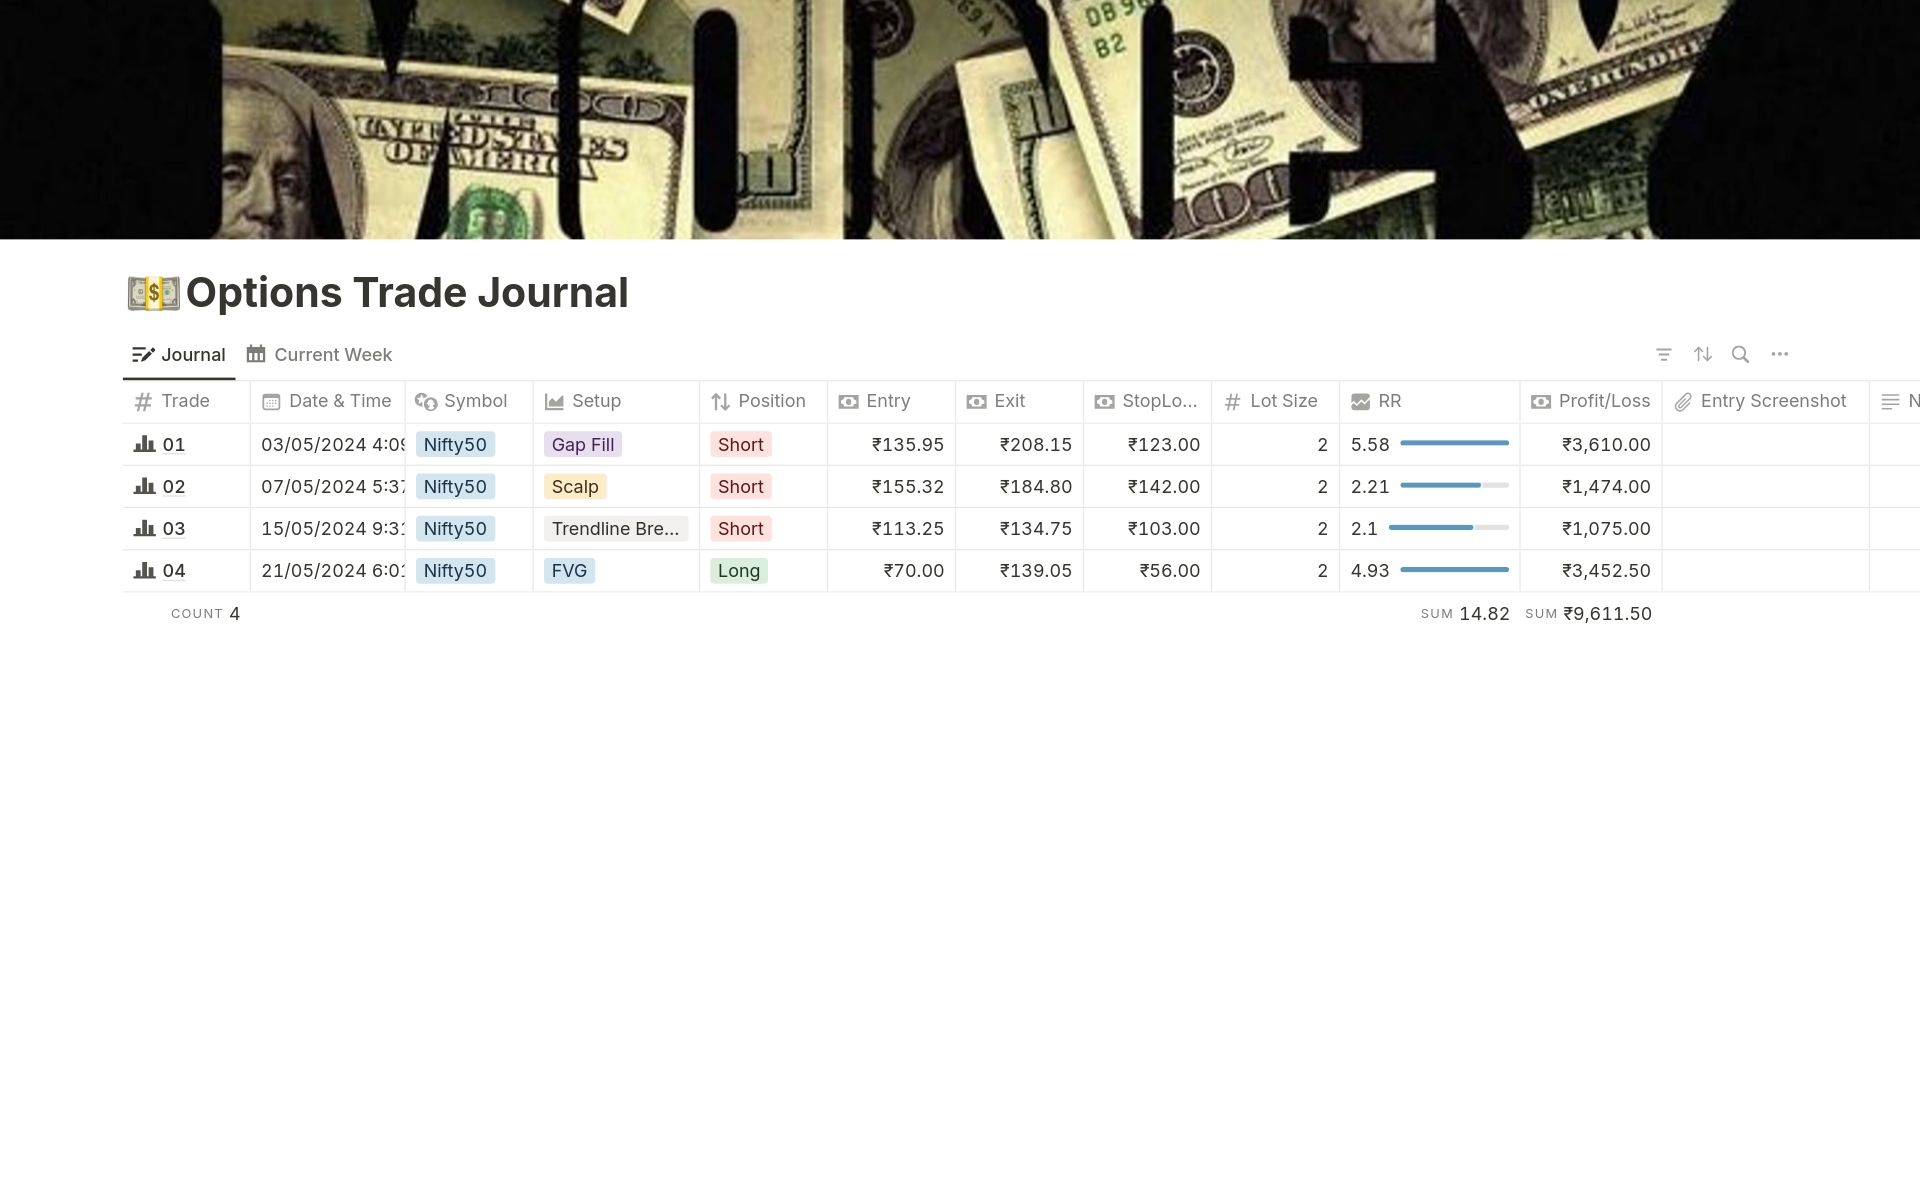 Free Options Trading Journal Template

Enhance Your Trading with Our Notion Template

Keep track of your options trading with our simple, free Notion template. Perfect for traders of all levels, this journal helps you analyze and improve your strategy over time.